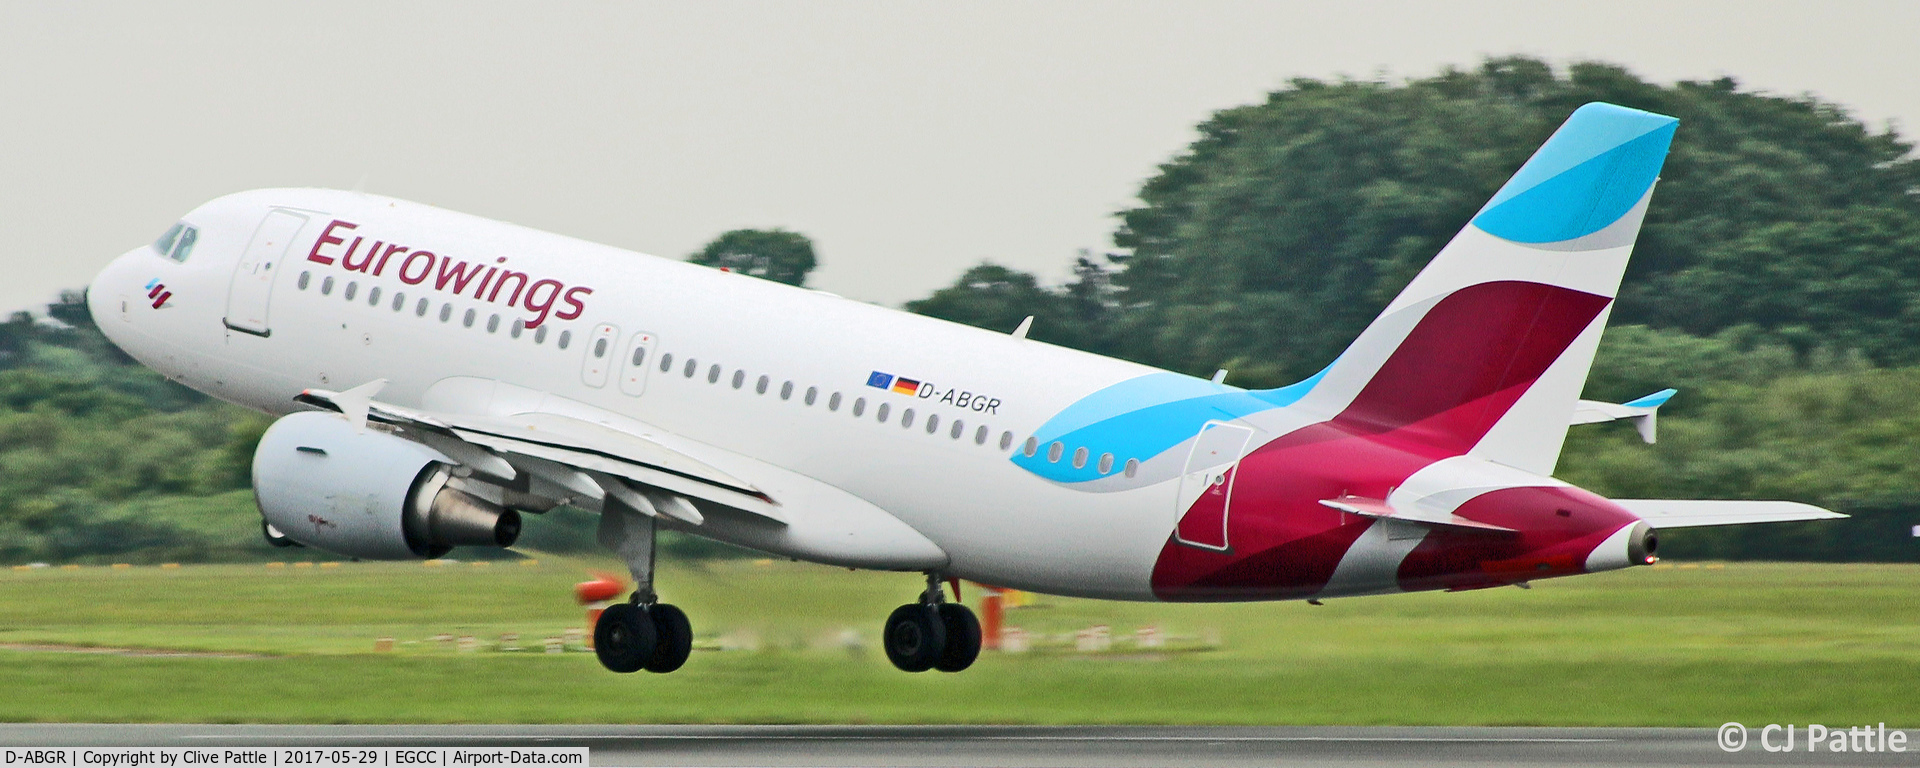 D-ABGR, 2008 Airbus A319-112 C/N 3704, Pictured at Manchester EGCC